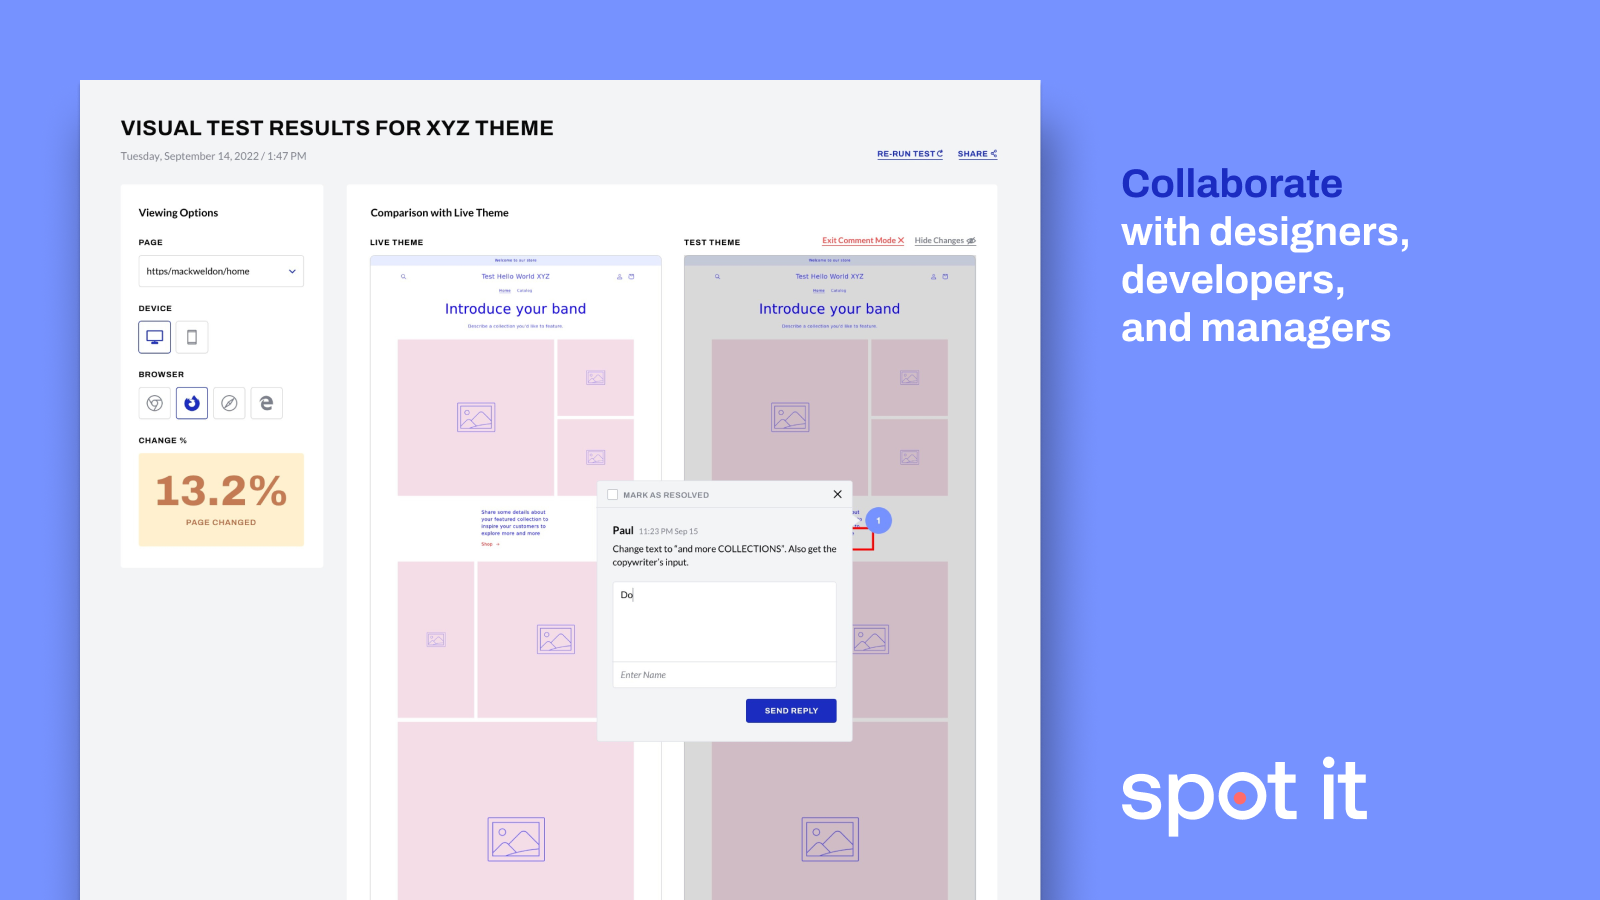 Collaborate with designers, developers, and managers